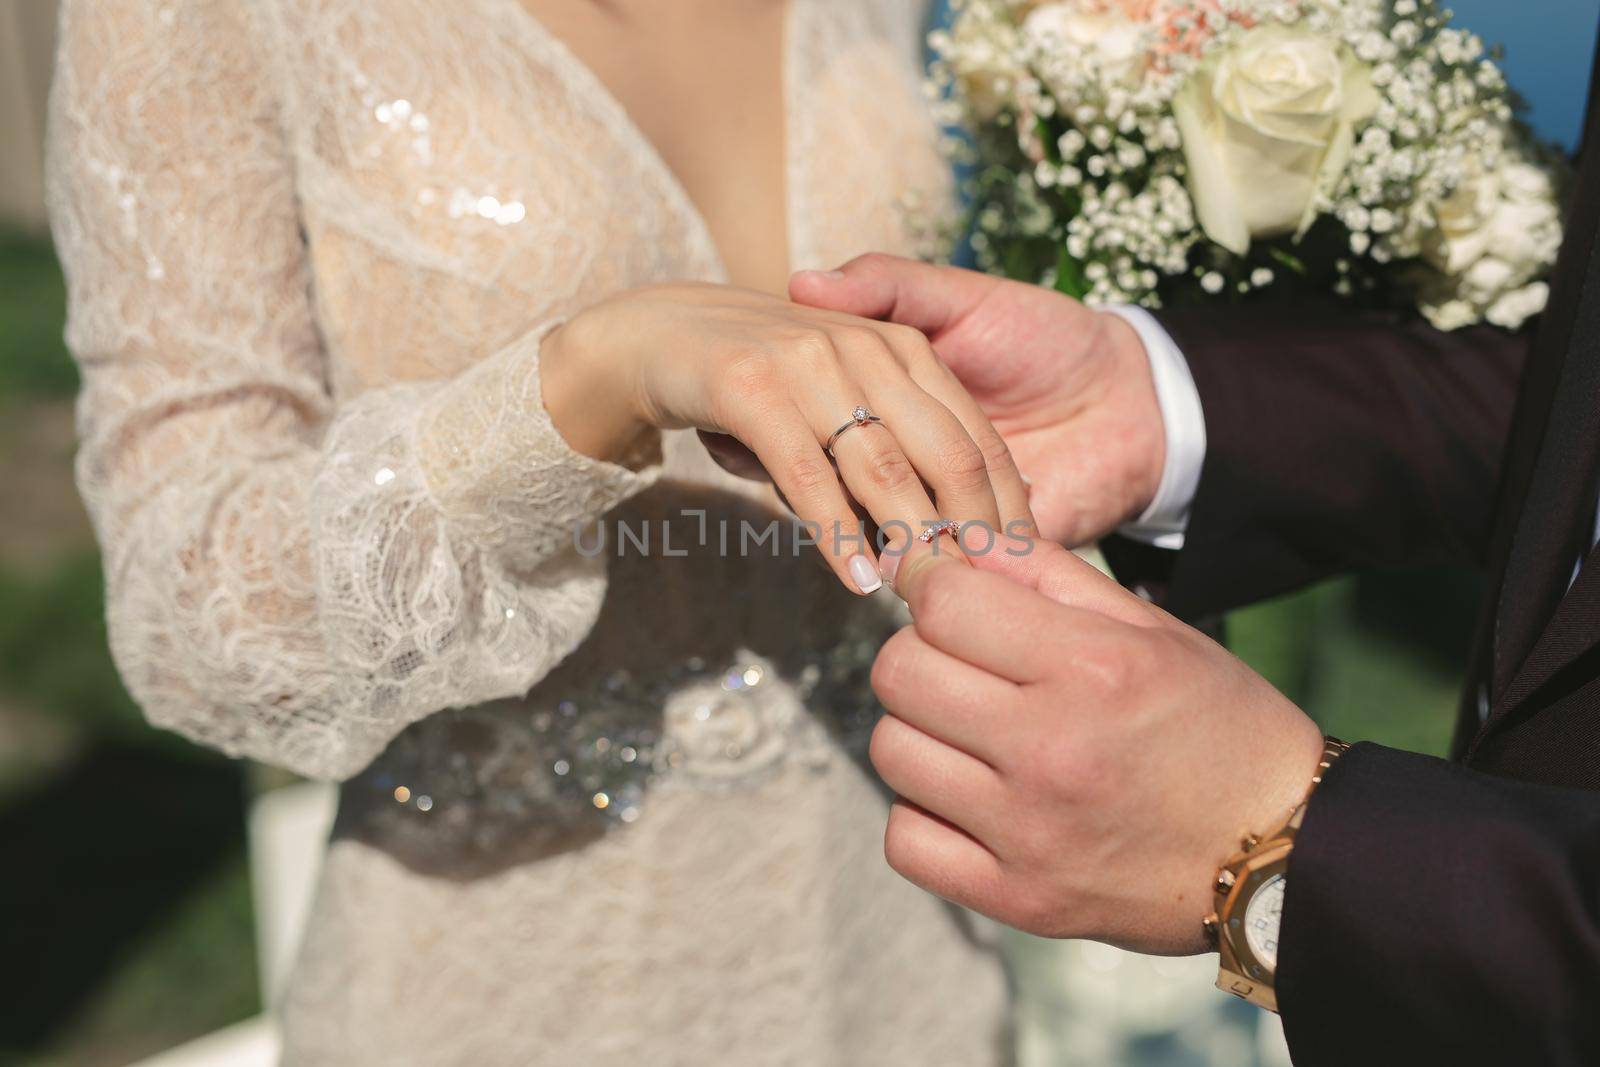 The groom puts the ring on the bride's finger in close-up. by StudioPeace